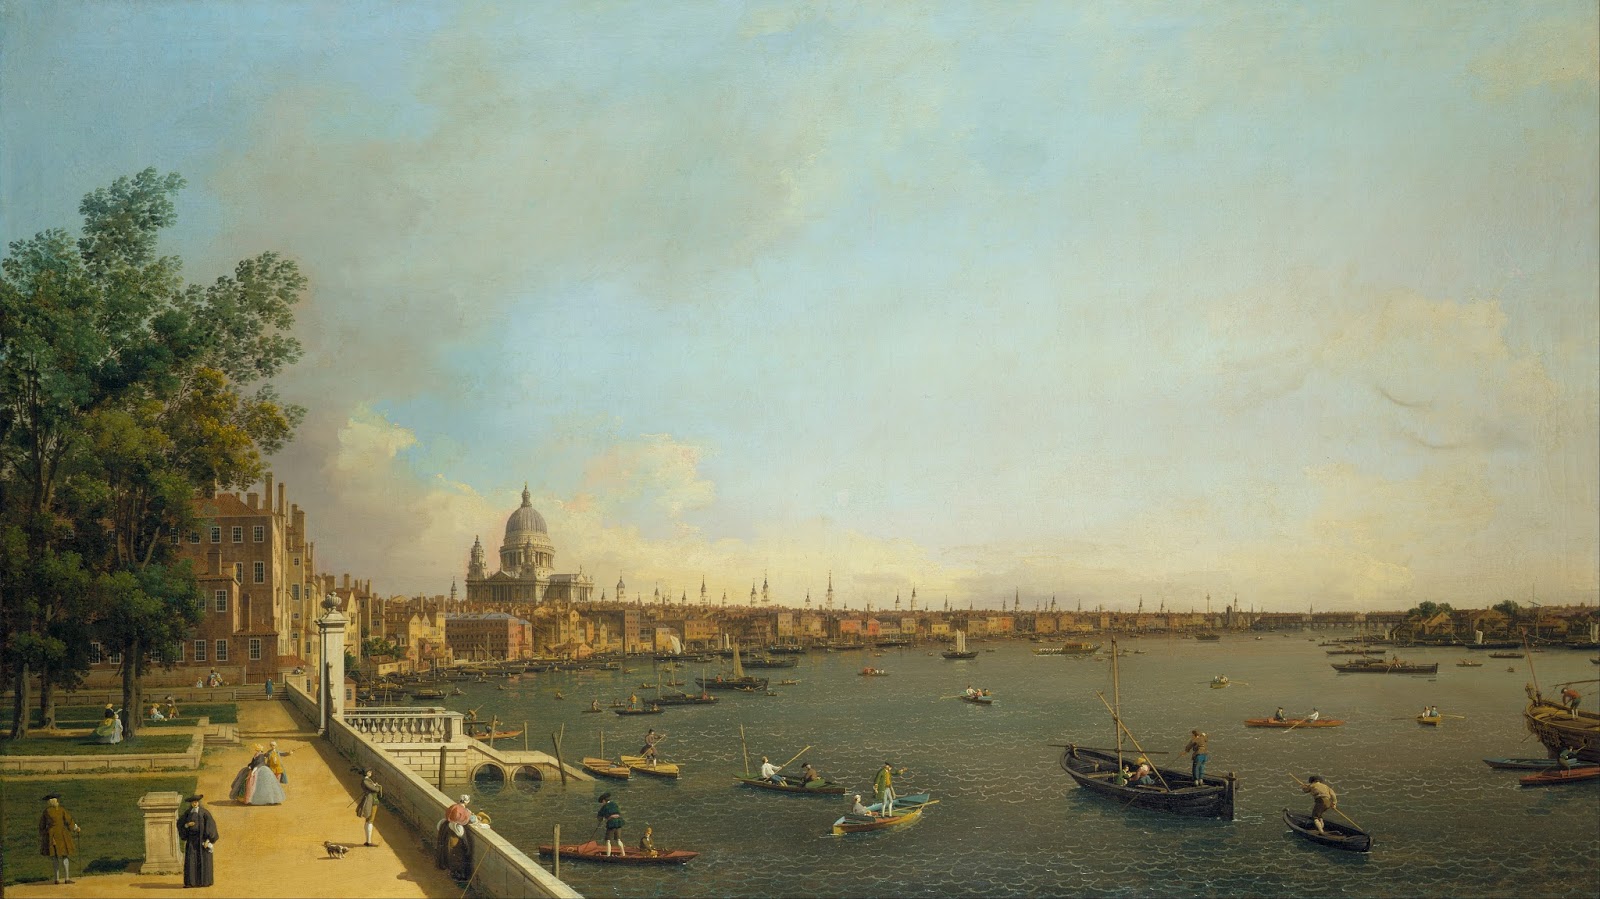 Canaletto-1697-1768 (2).jpg